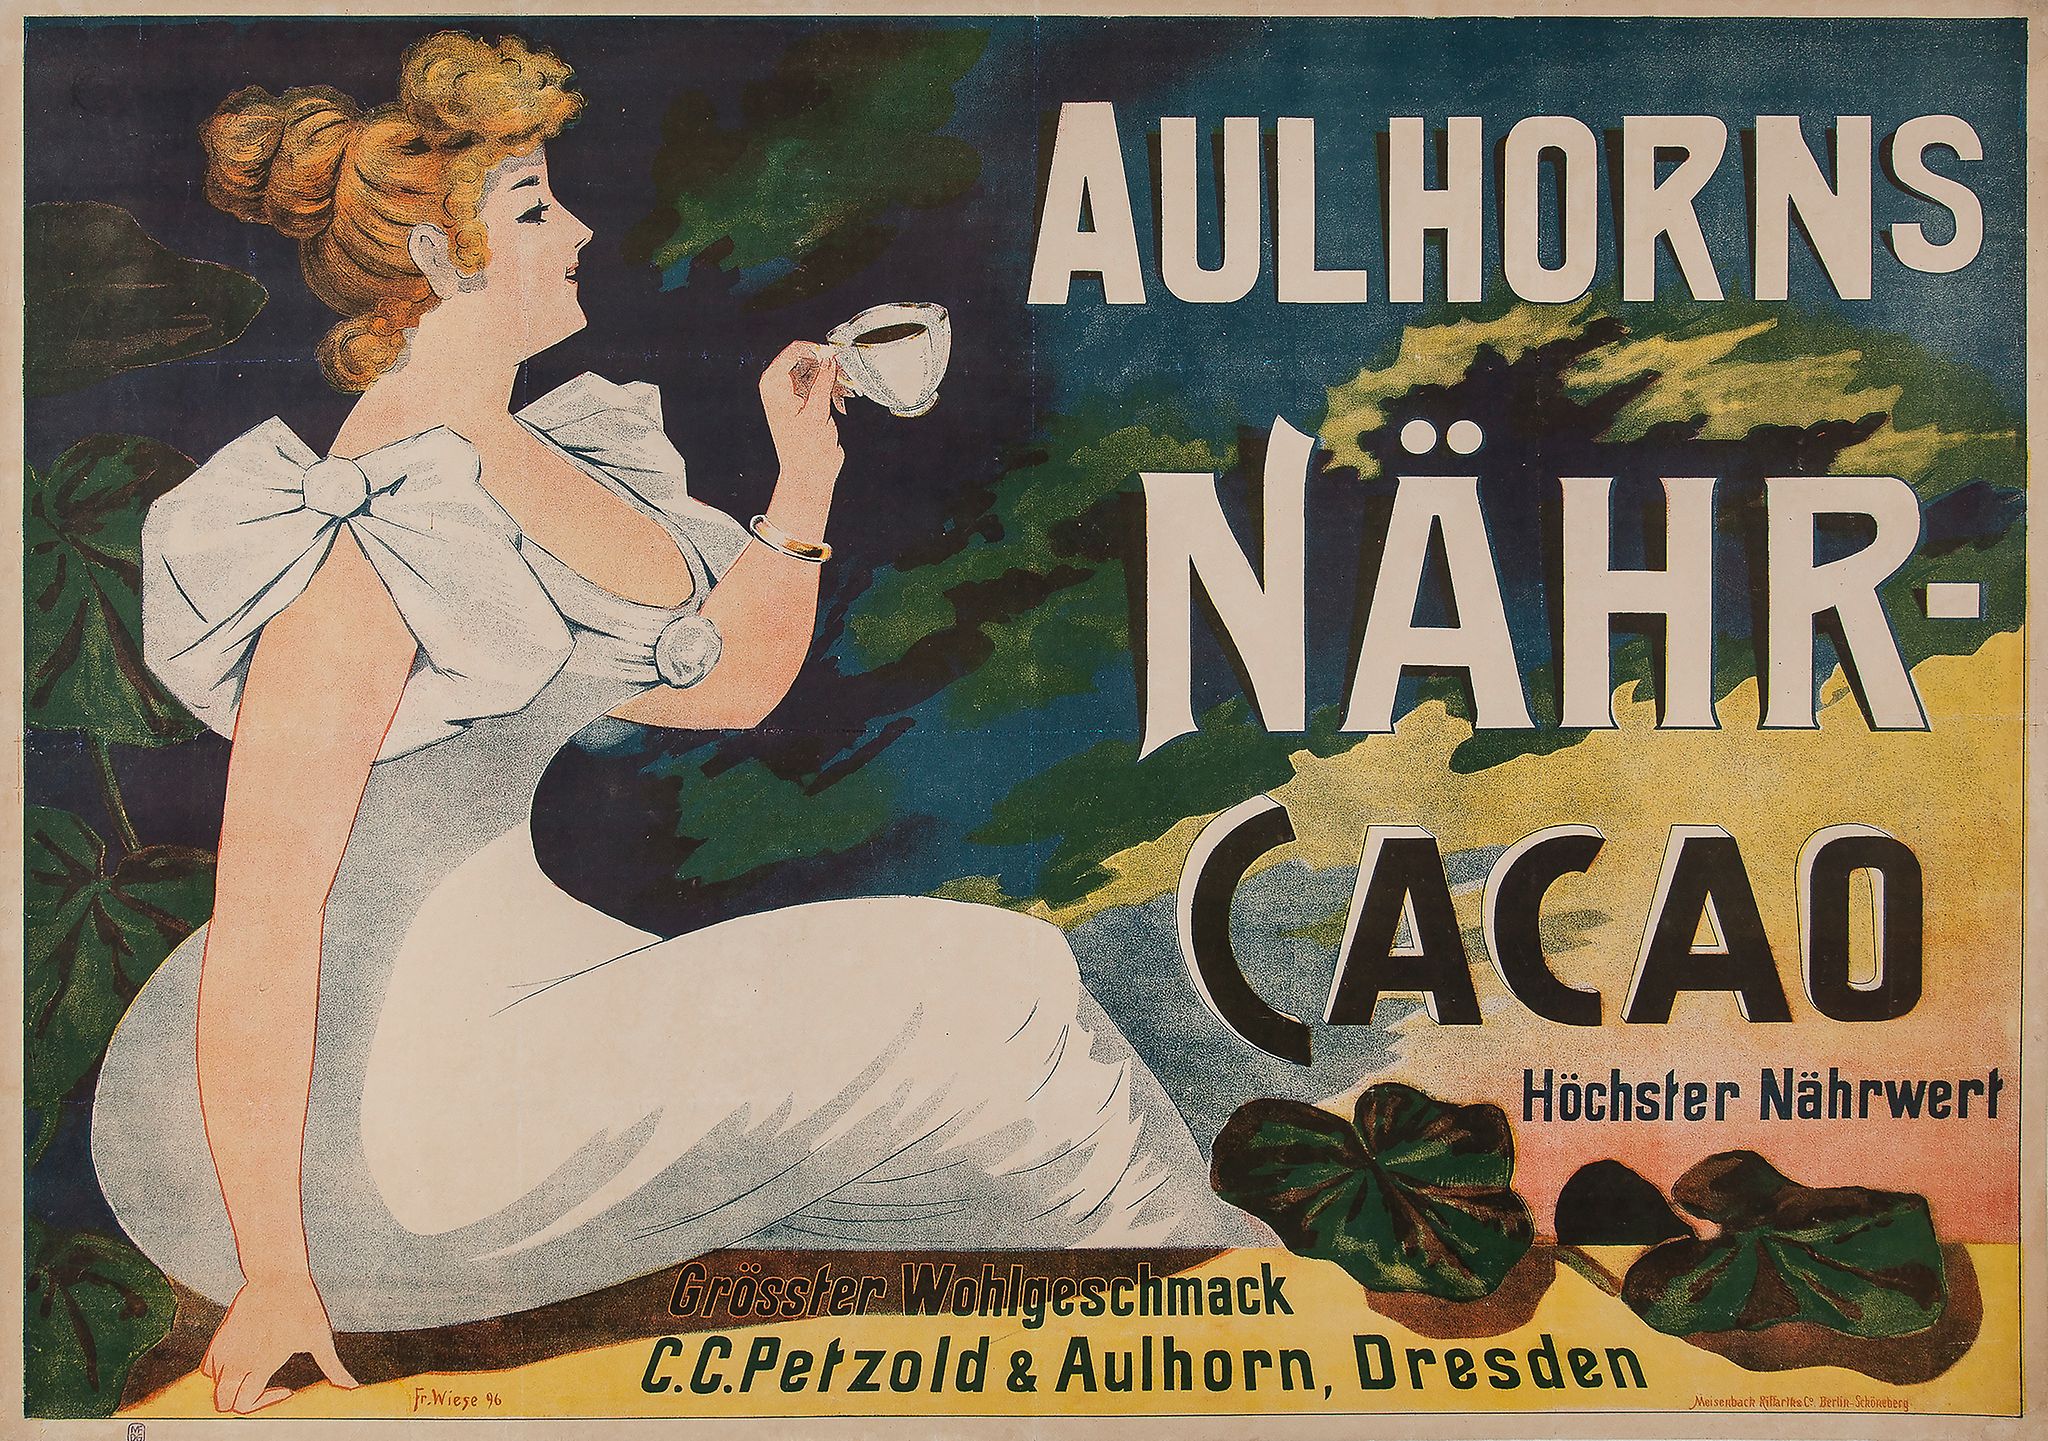 WIESE, Fr - AULHORNS NAHR-CACAO lithographic poster in colours, 1896, printed by Meisenback Riffarik